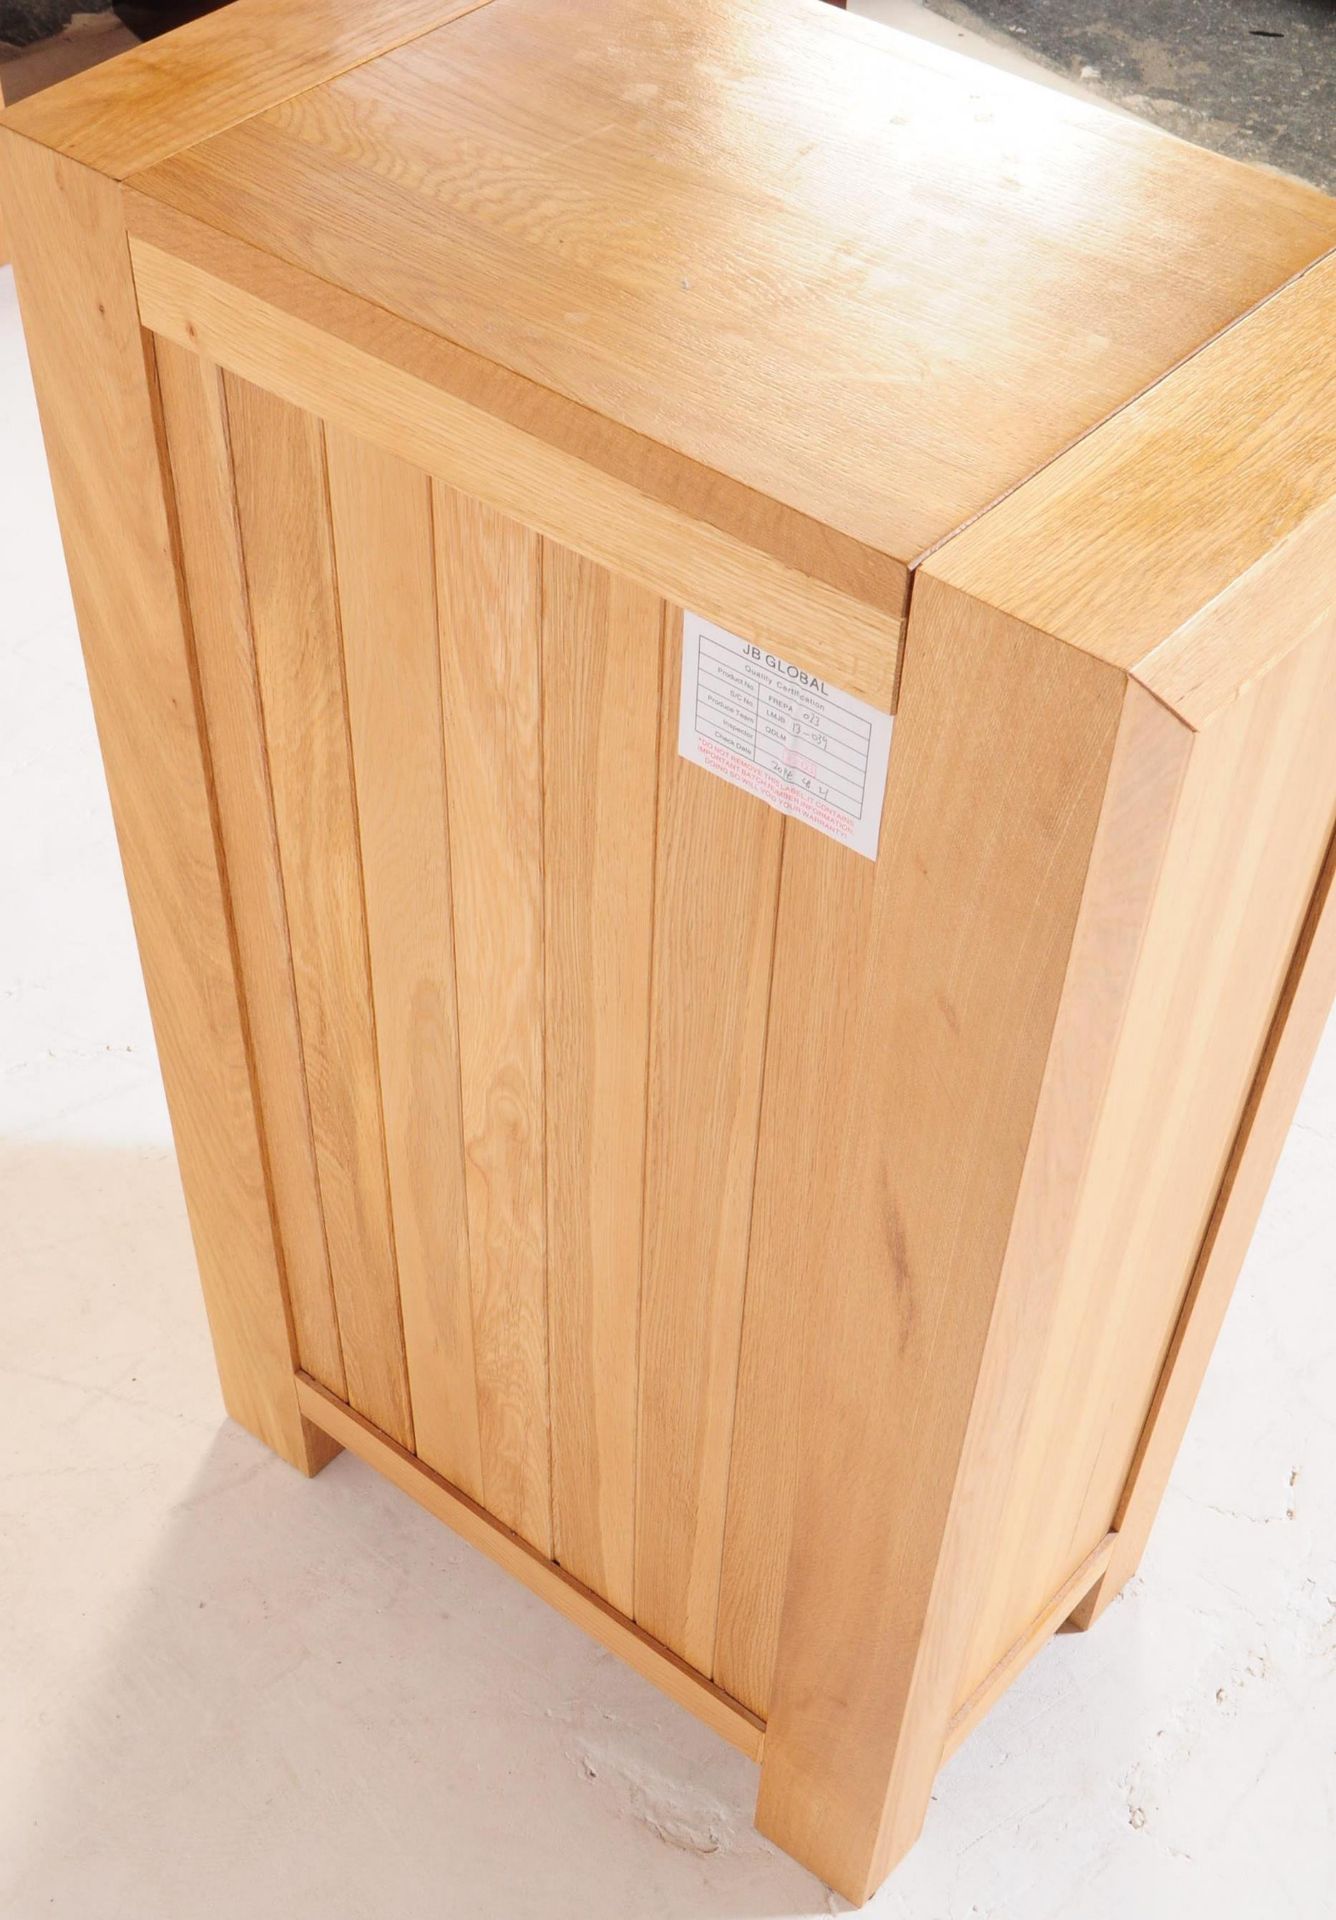 M&S SONOMA - PAIR OF OAK BEDSIDE TABLES - Image 5 of 11